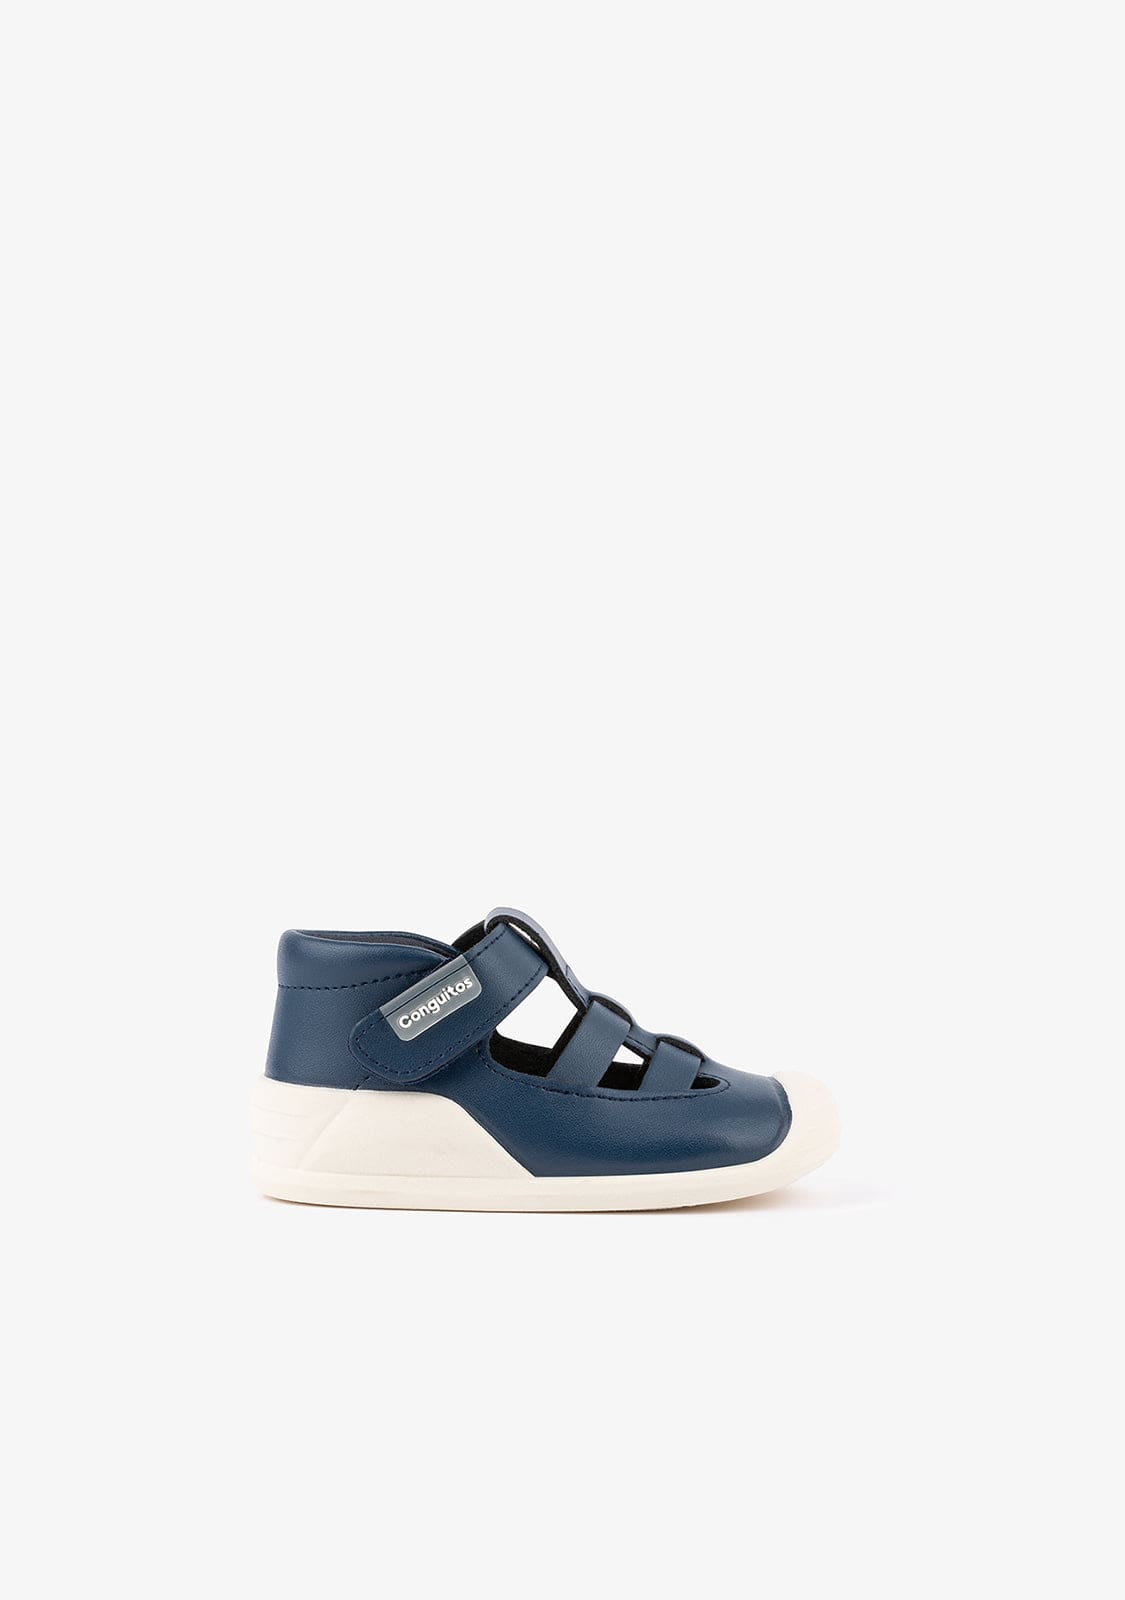 CONGUITOS Shoes Baby's Navy First Steps Sandals